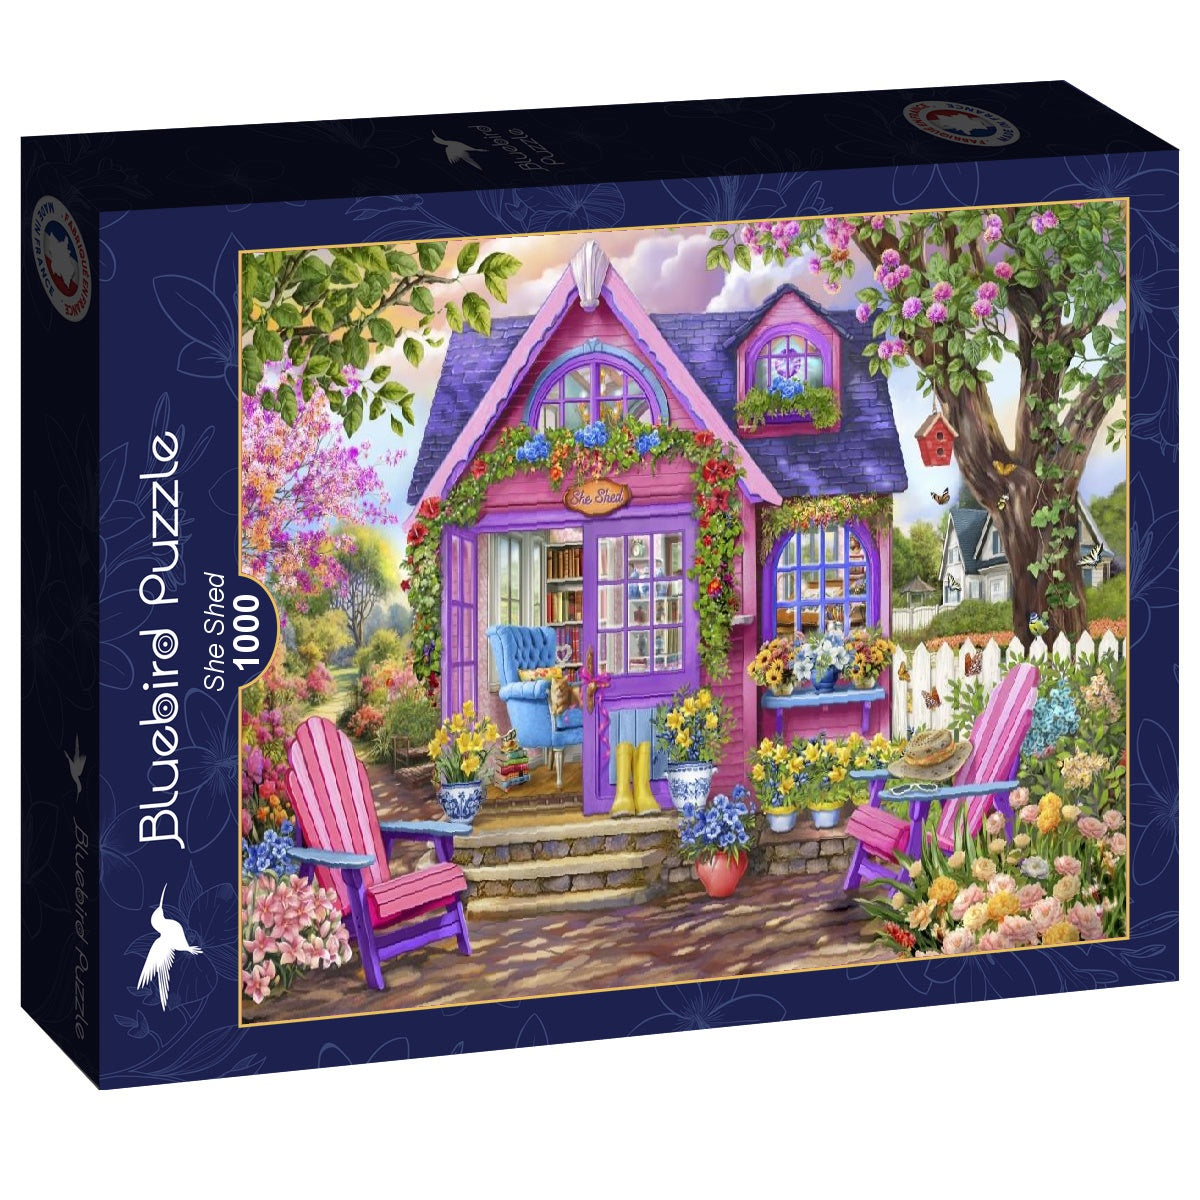 She Shed by Bigelow Illustrations, 1000 Piece Puzzle